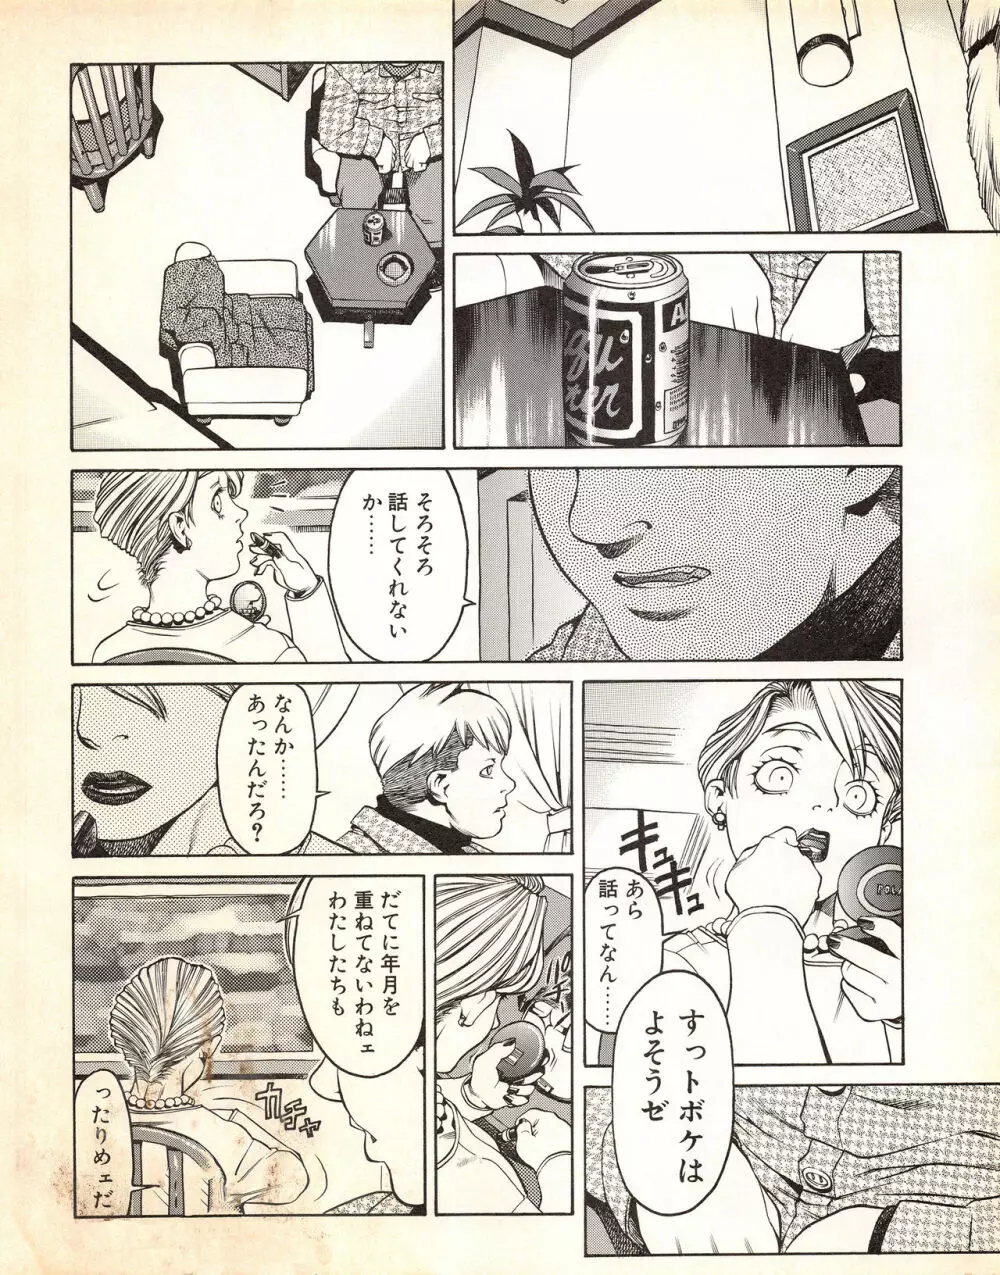 Tech Gian Issue 17 Page.126